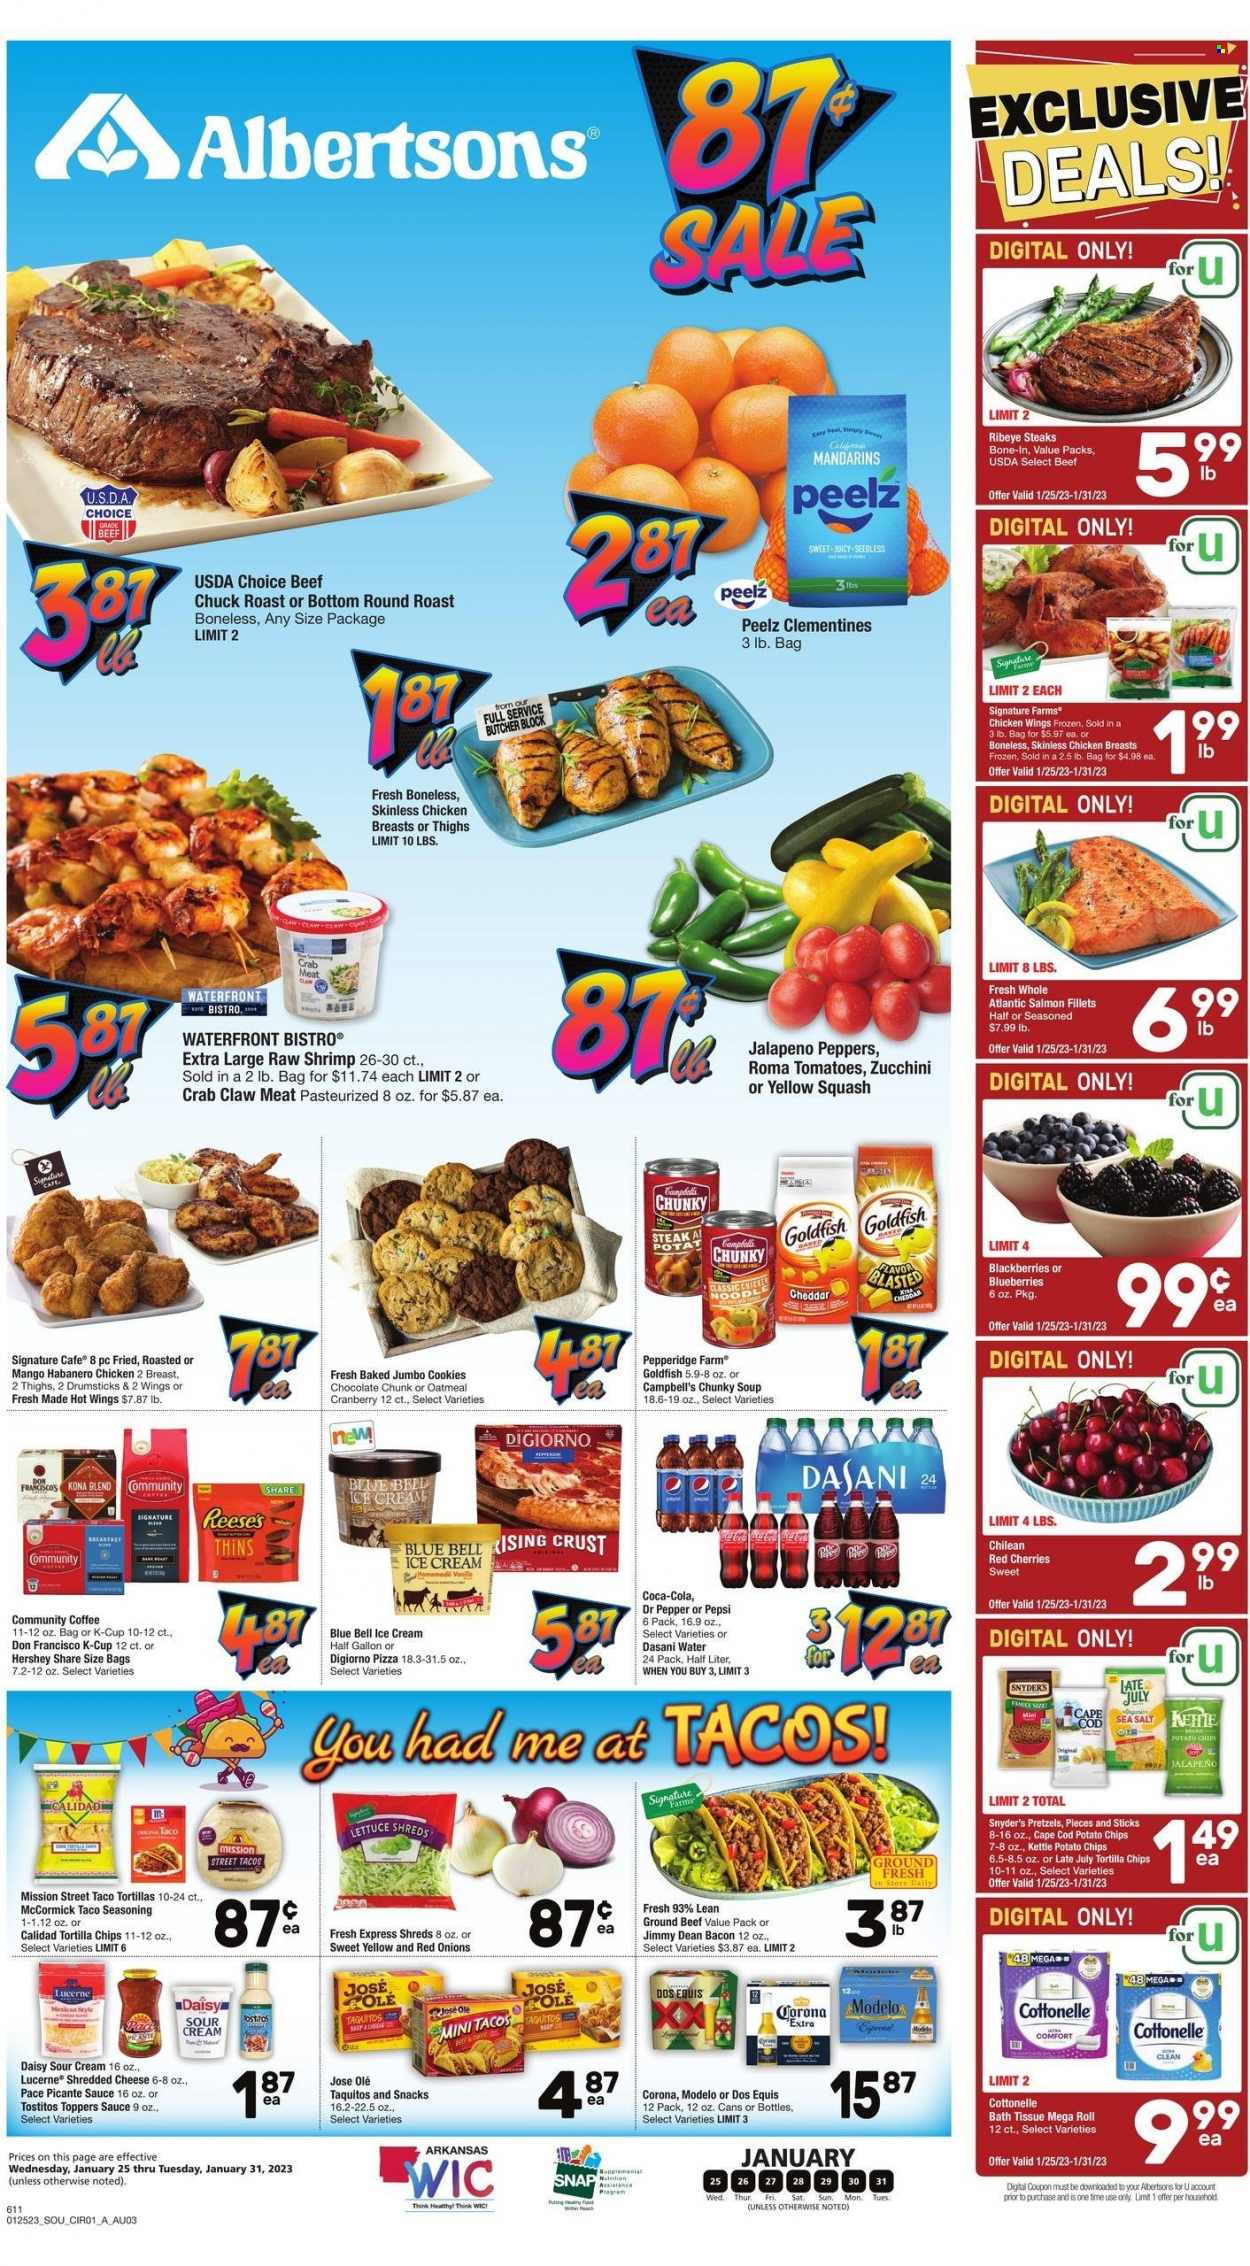 thumbnail - Albertsons Flyer - 01/25/2023 - 01/31/2023 - Sales products - pretzels, zucchini, lettuce, jalapeño, yellow squash, blackberries, blueberries, mandarines, cherries, cod, crab meat, salmon, salmon fillet, crab, shrimps, Campbell's, pizza, soup, sauce, habanero chicken, taquitos, Jimmy Dean, bacon, shredded cheese, sour cream, ice cream, Reese's, Blue Bell, chicken wings, cookies, tortilla chips, potato chips, Thins, Goldfish, Tostitos, oatmeal, spice, Coca-Cola, Pepsi, Dr. Pepper, coffee, coffee capsules, K-Cups, beer, Corona Extra, Modelo, chicken breasts, beef meat, ground beef, steak, round roast, chuck roast, ribeye steak, bath tissue, Cottonelle, clementines, Dos Equis. Page 1.